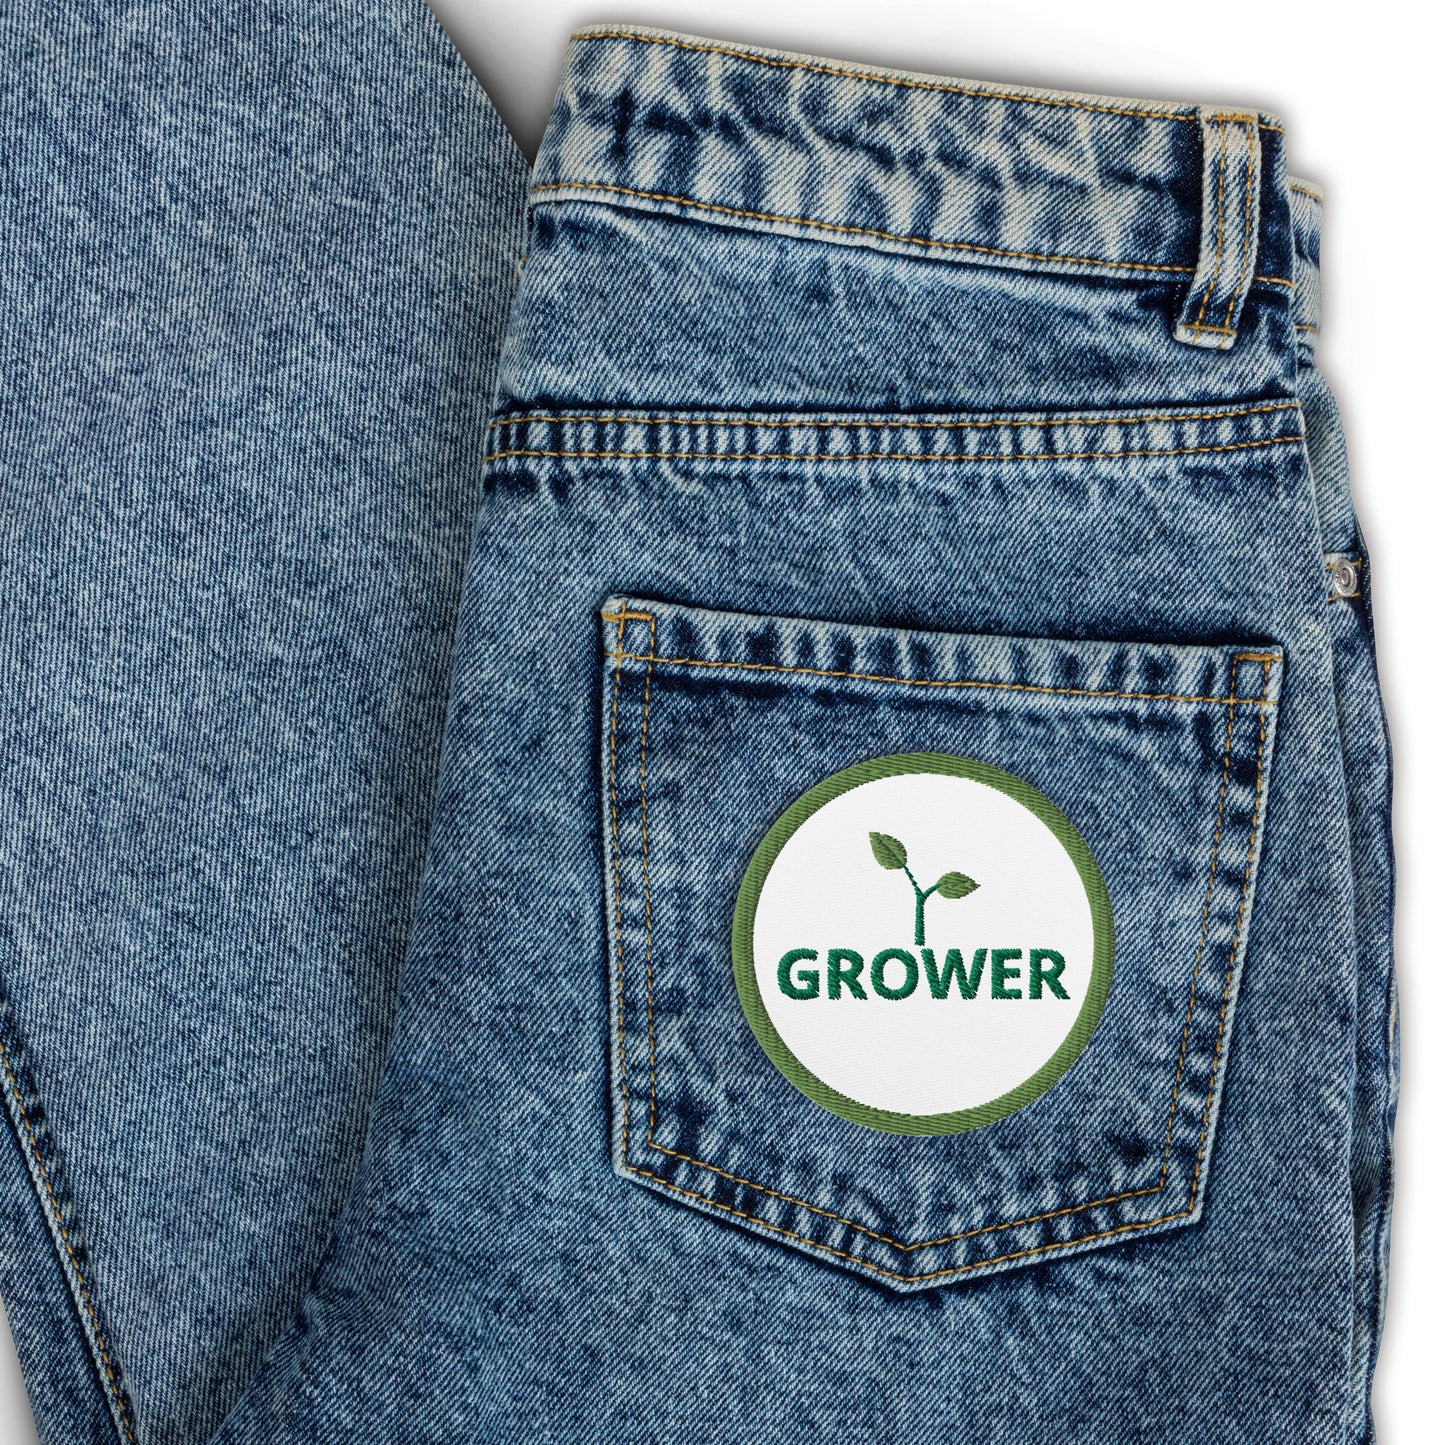 Grower Patch